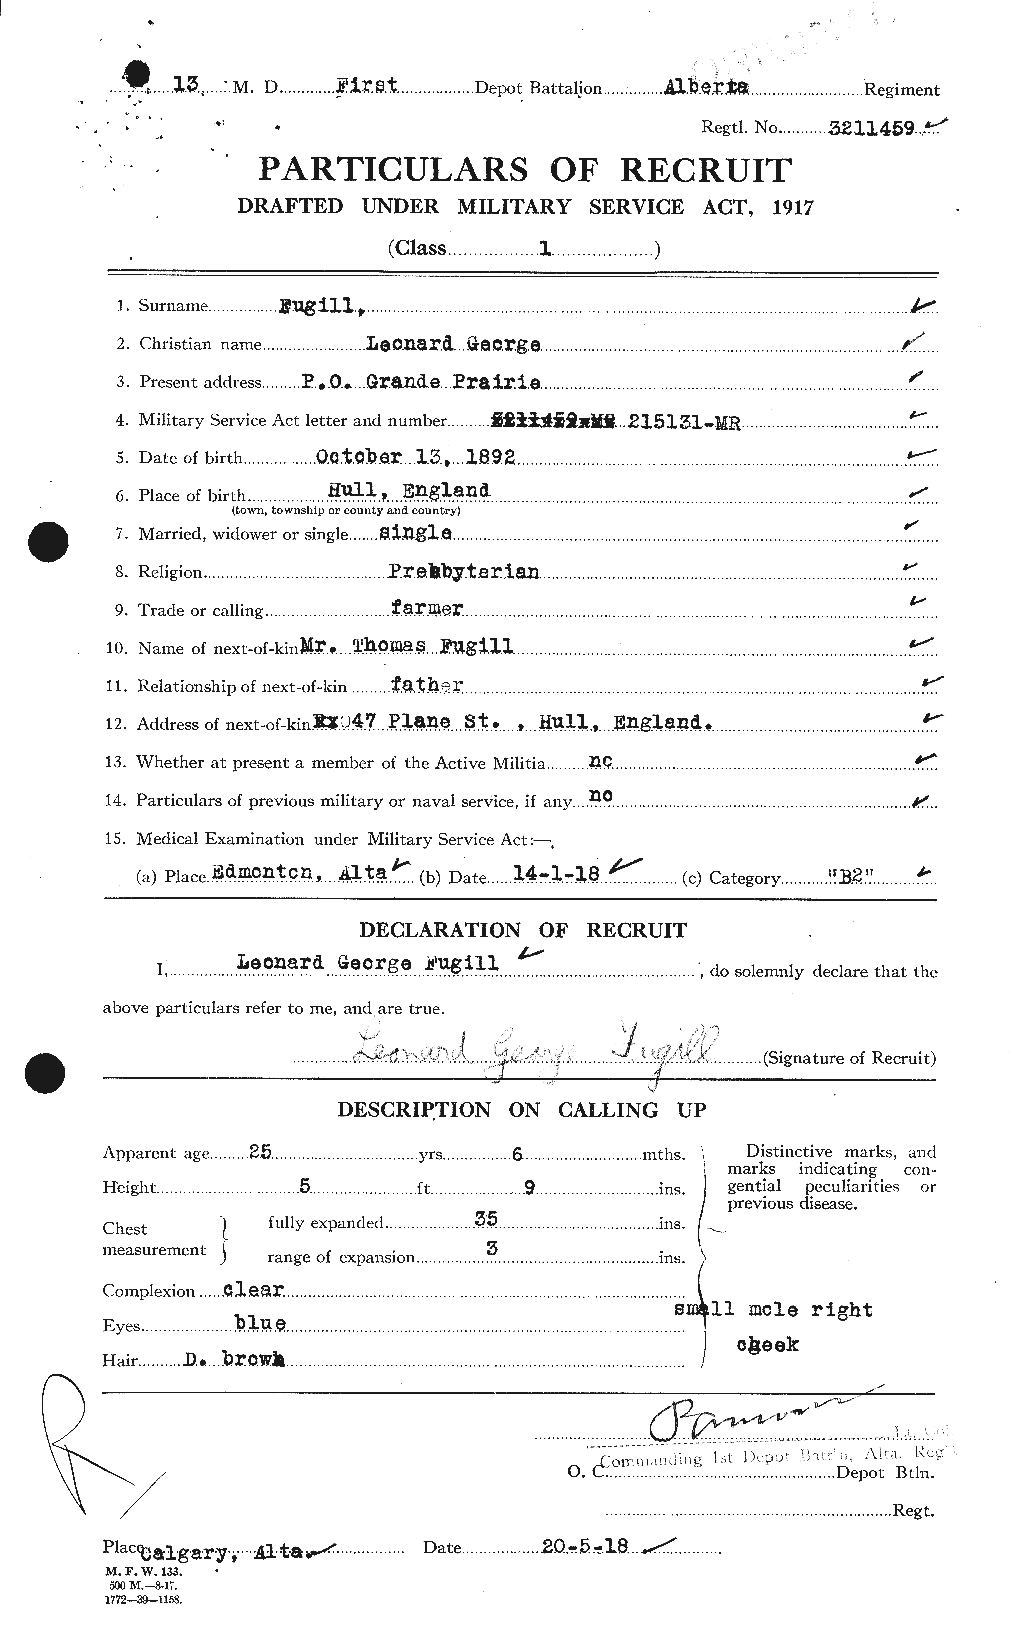 Personnel Records of the First World War - CEF 337152a